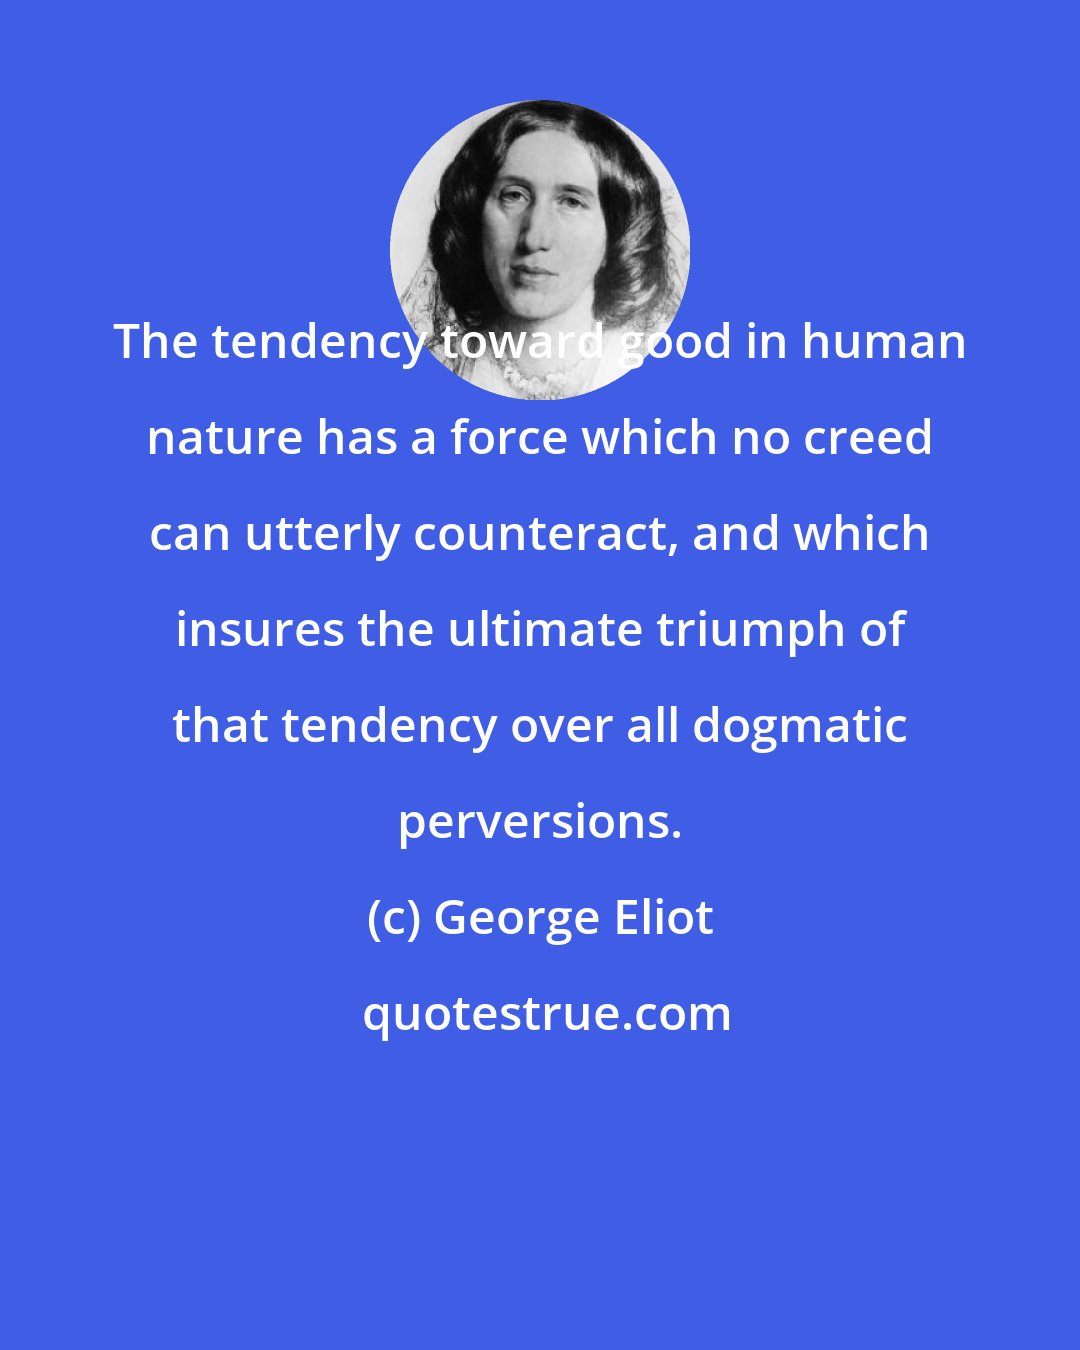 George Eliot: The tendency toward good in human nature has a force which no creed can utterly counteract, and which insures the ultimate triumph of that tendency over all dogmatic perversions.